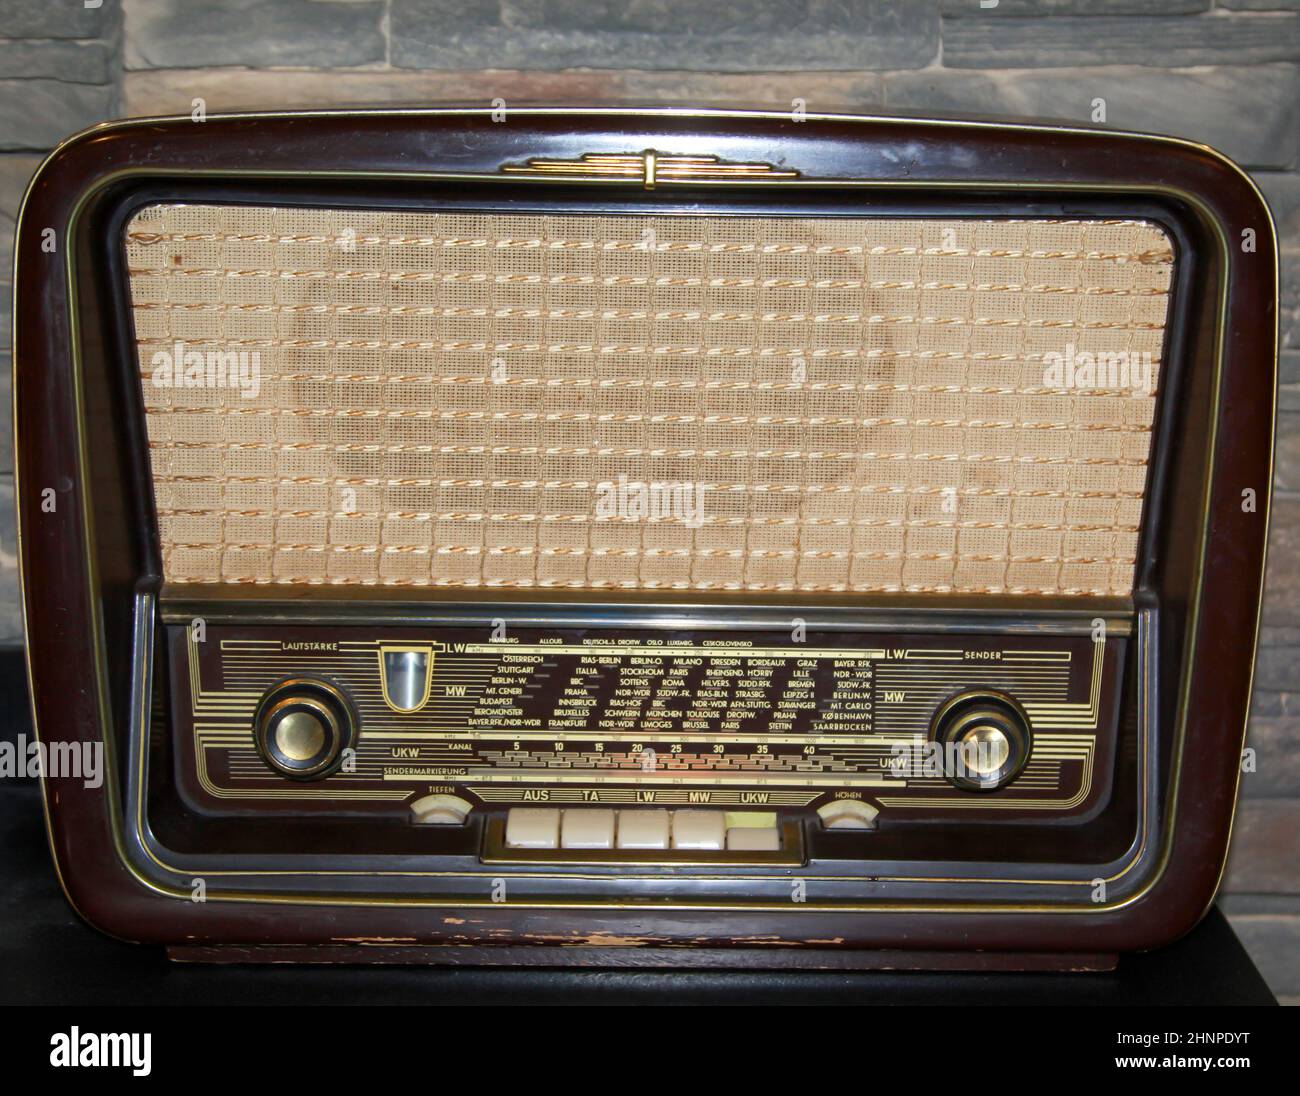 Fm radio hi-res stock photography and images - Alamy